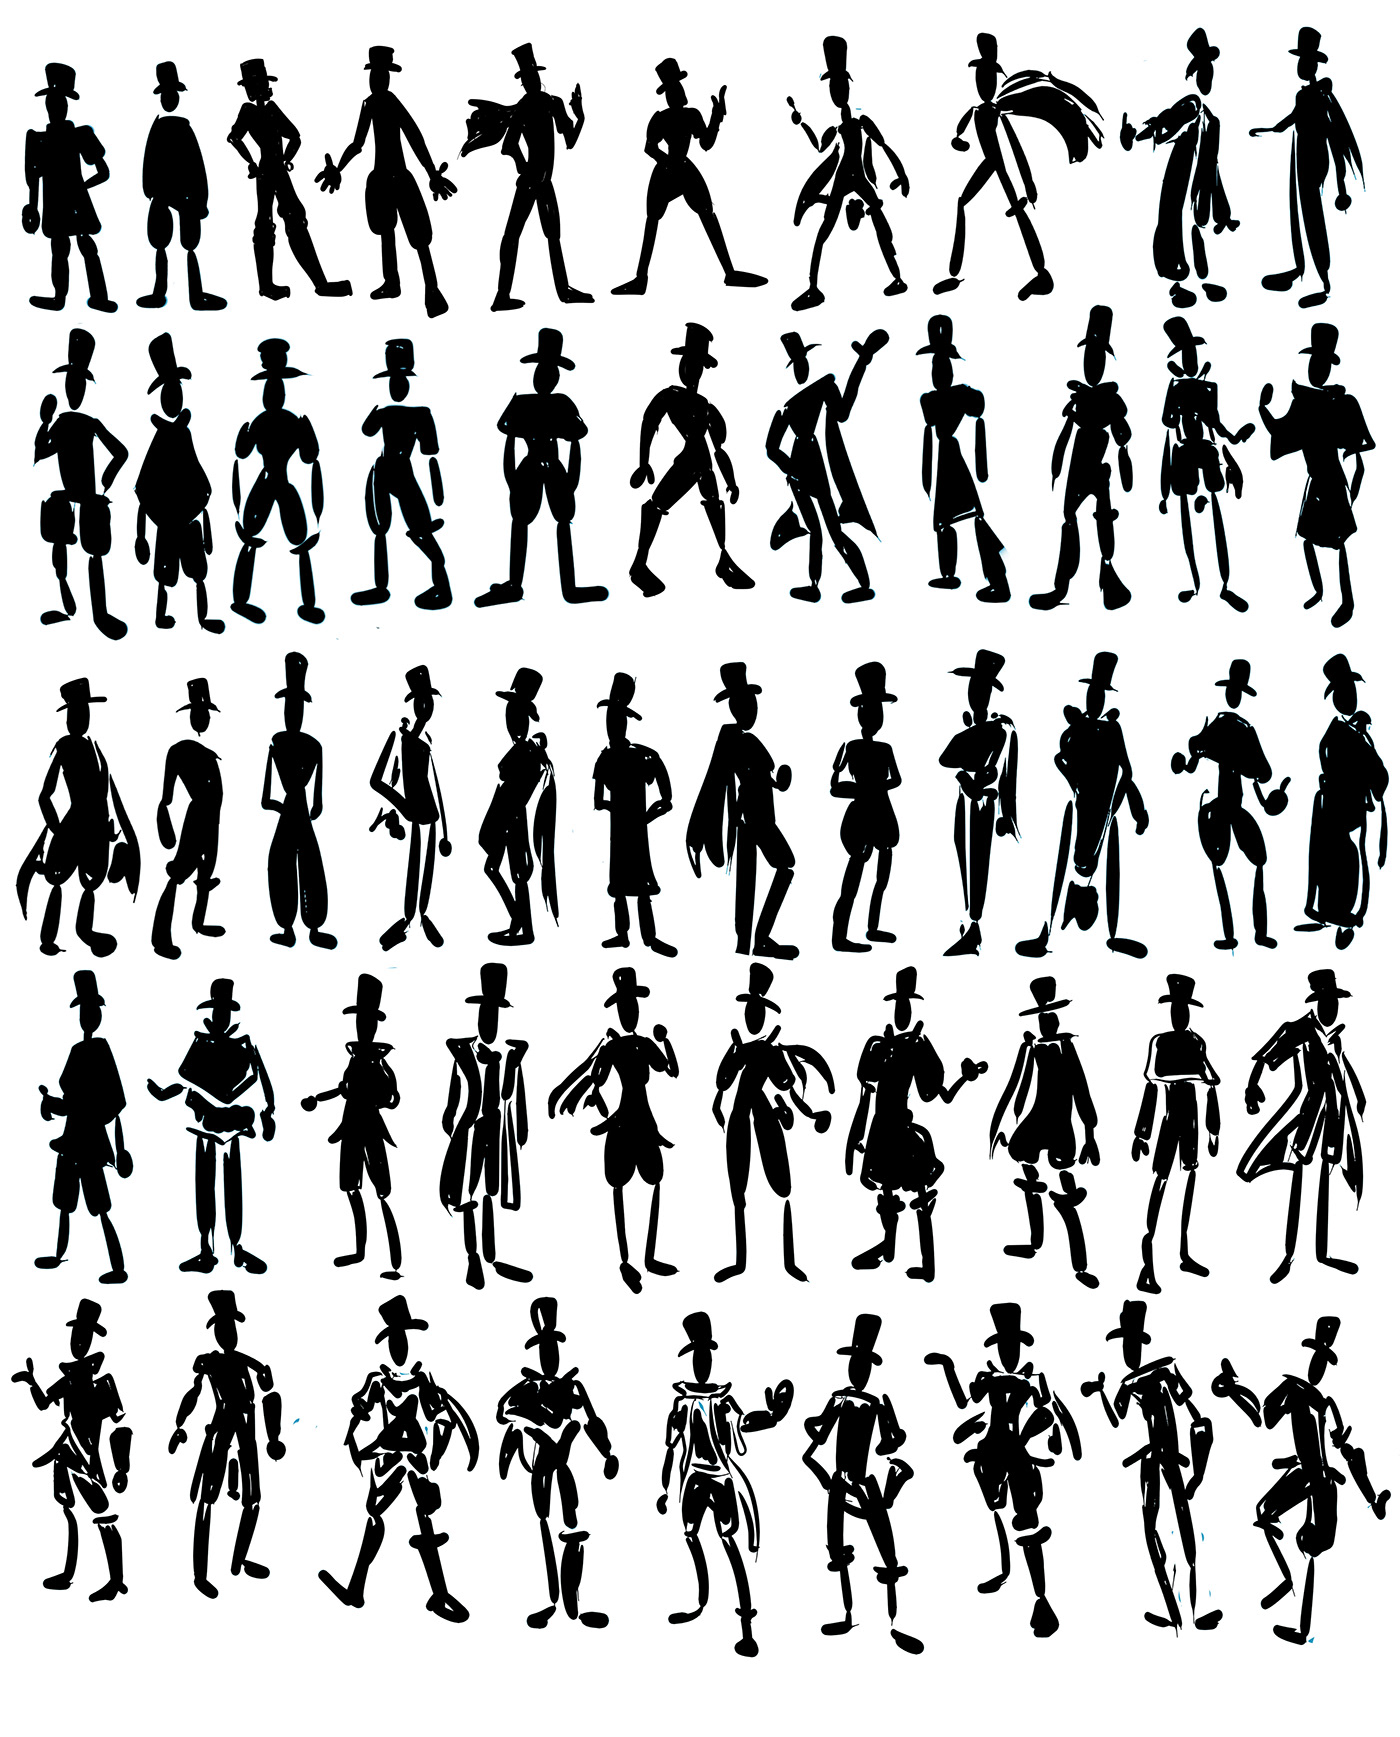 character designs character silhouettes Silhouettes